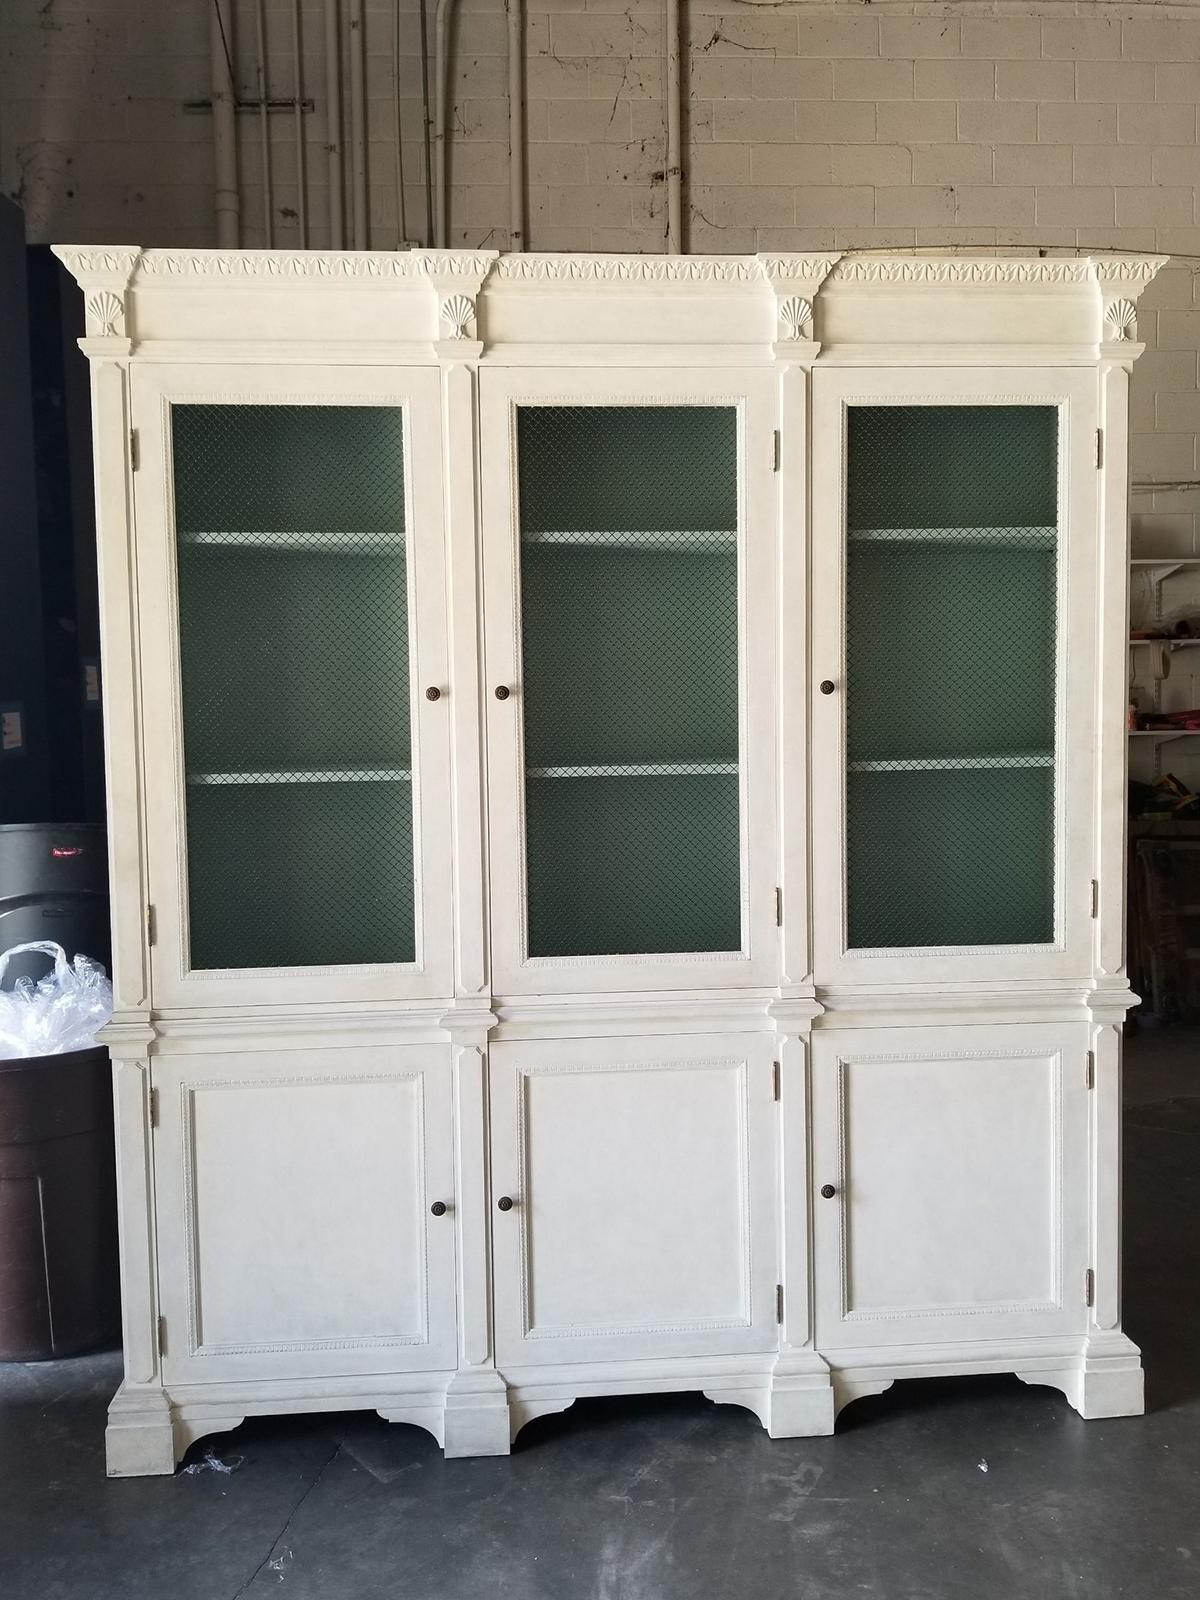 20th century Italian neoclassical Regency custom painted breakfront with chicken wire and shell motif
Two pieces
Widest and deepest parts at crown (at the top)
Measures: Overall: 81.75